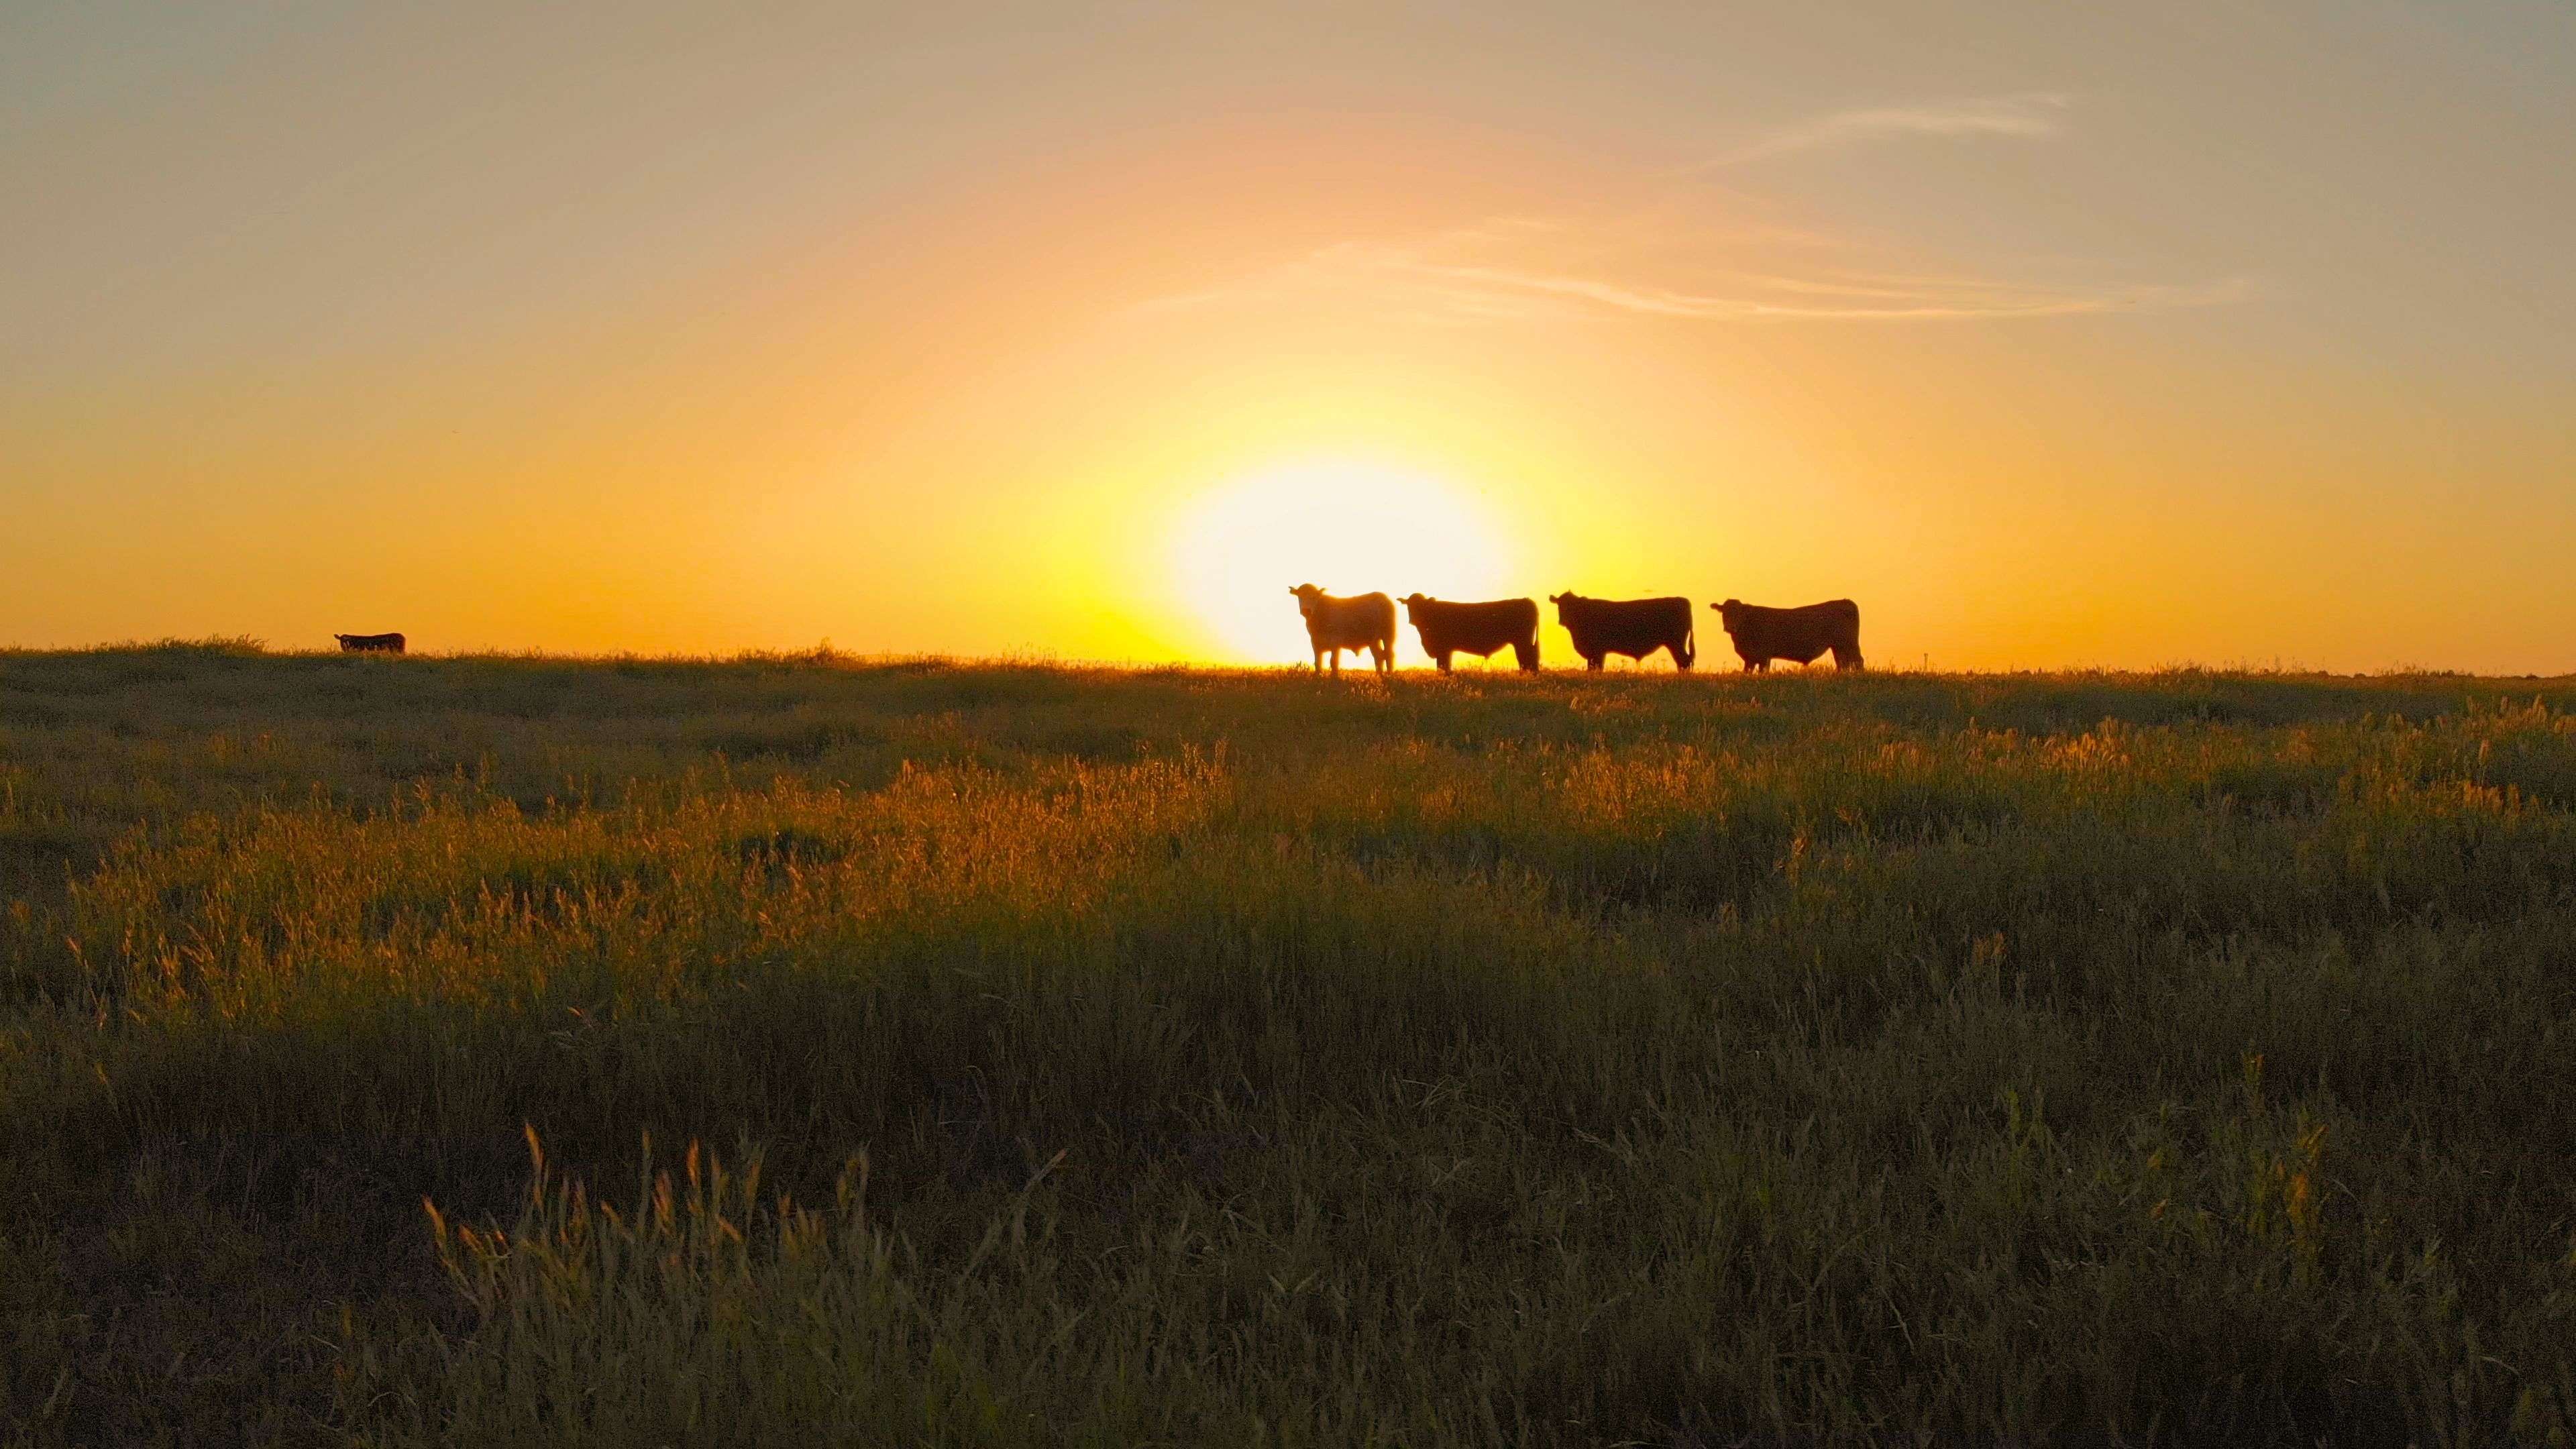 Cows on the field during sunset